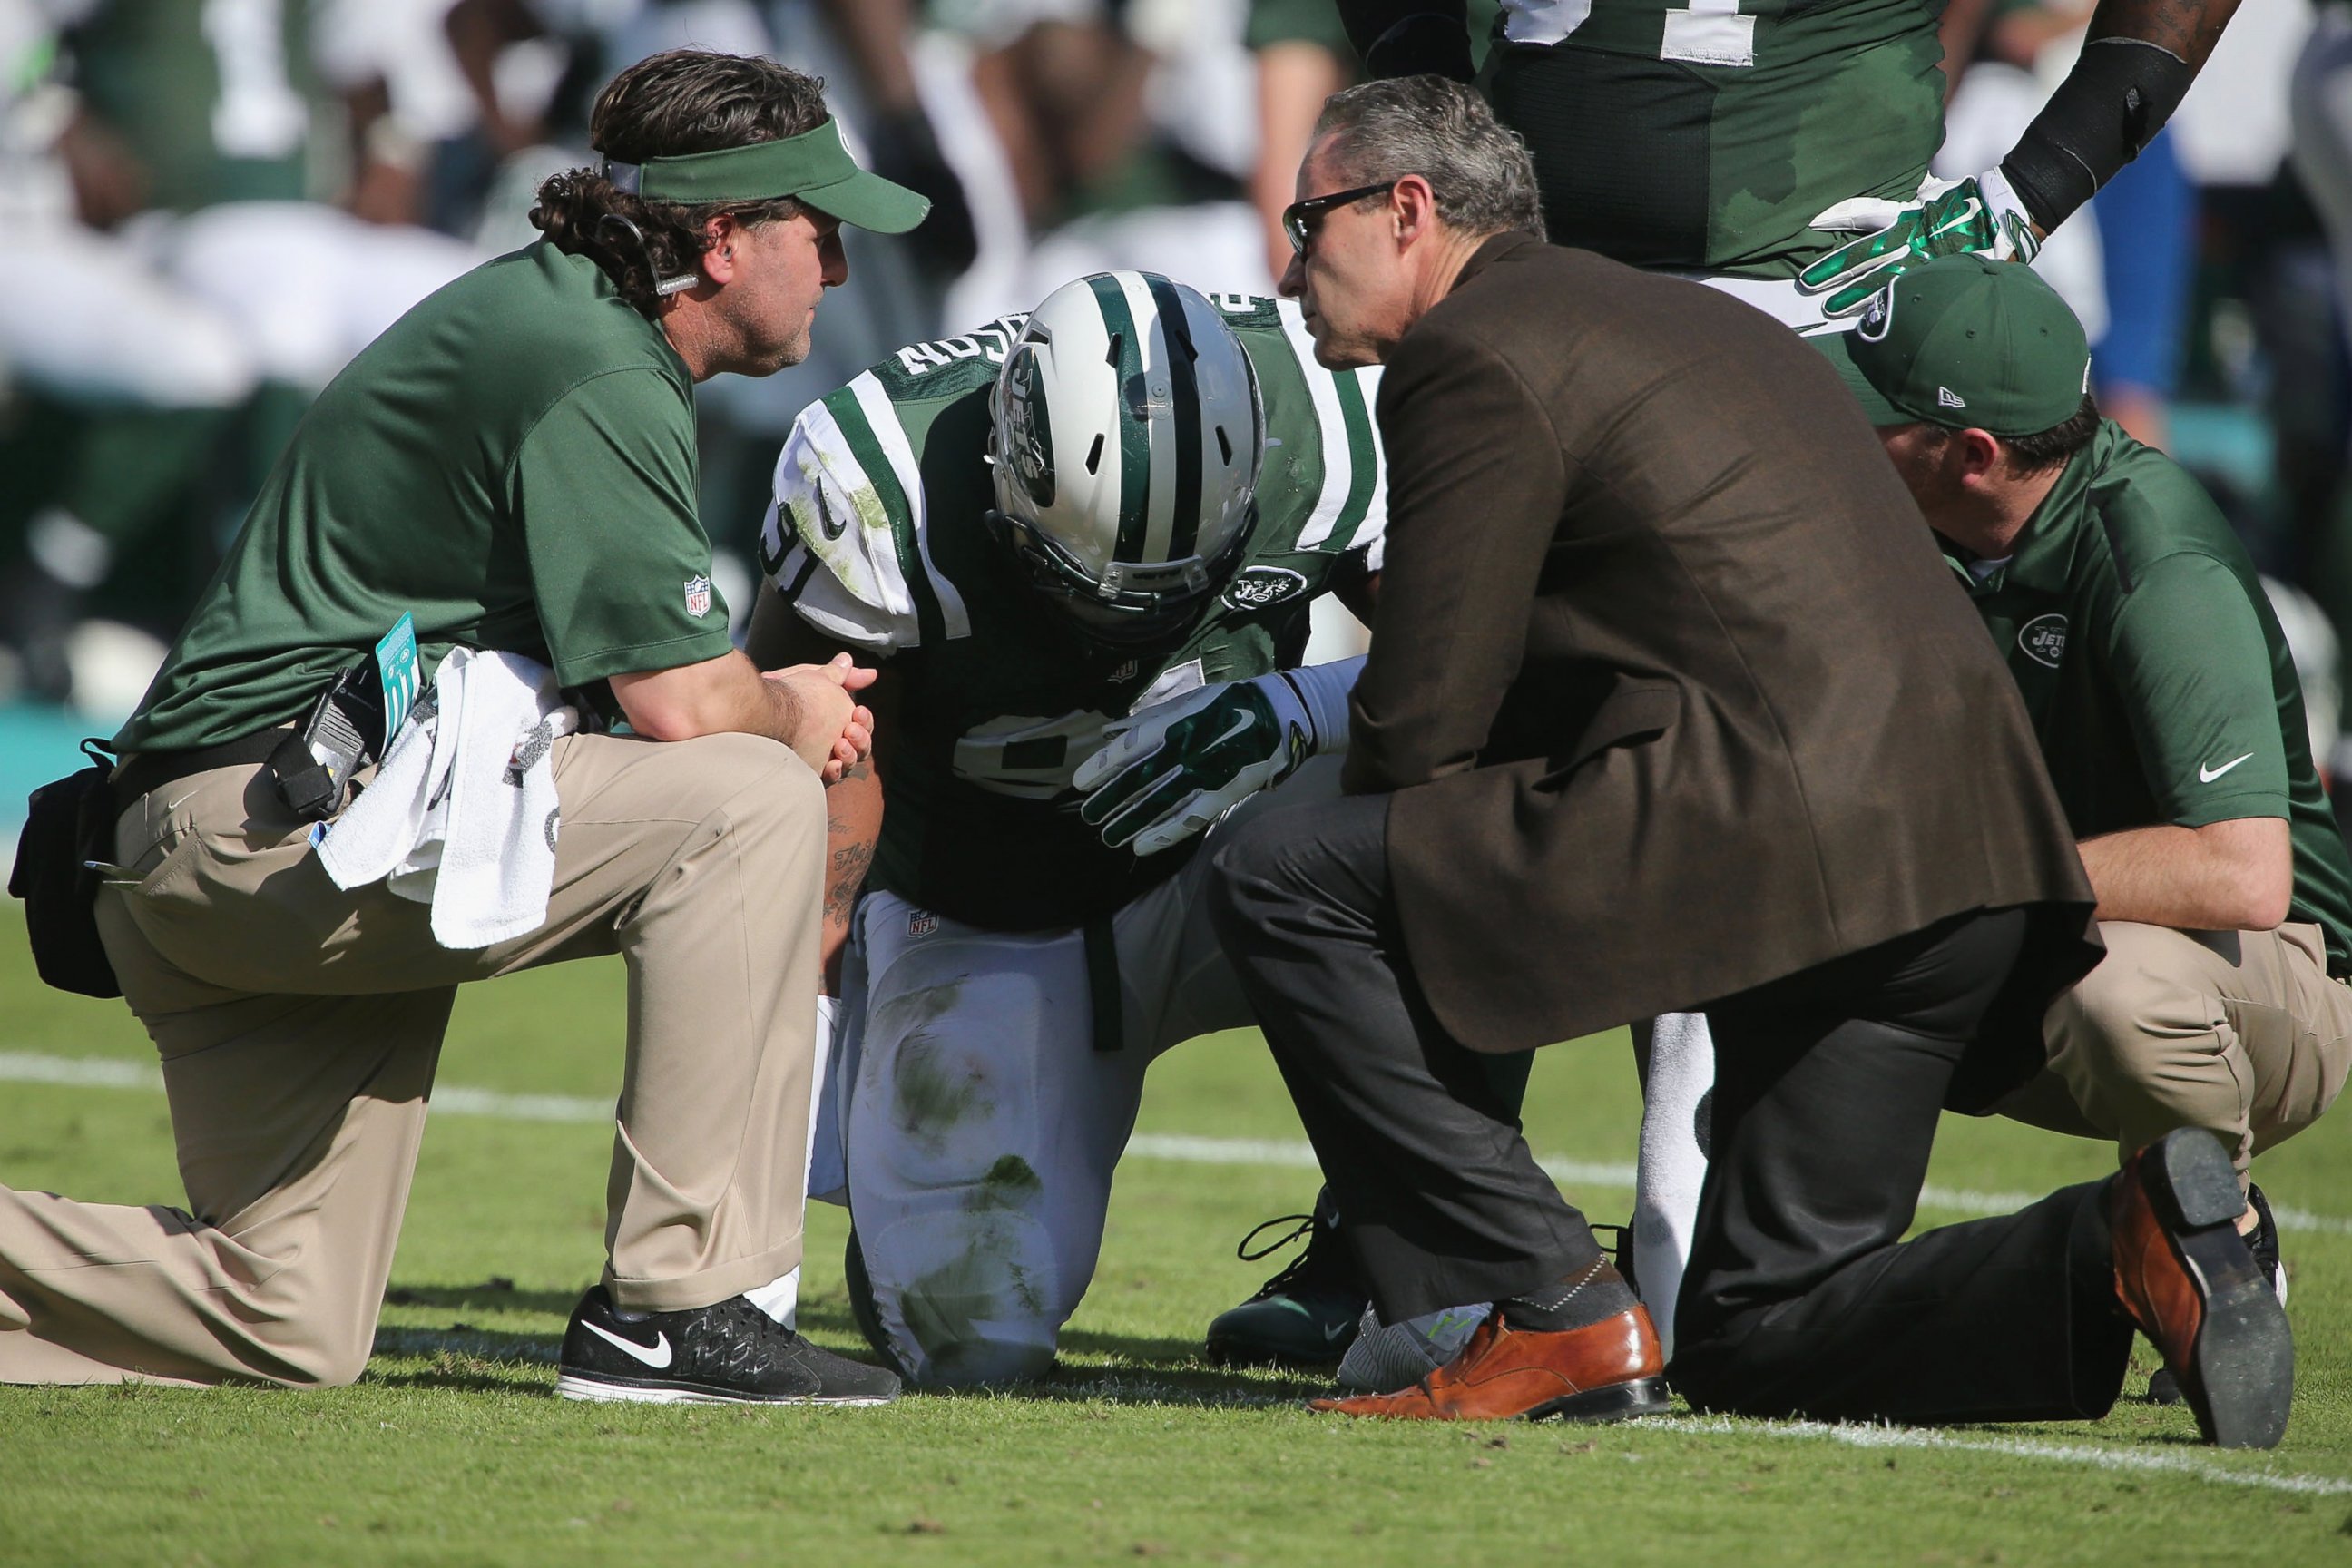 PHOTO: Defensive Lineman Sheldon Richardson #91 of the New York Jets is injured and attended to by Head Trainer John Mellody and Team Doctor Kenneth Montgomery at Sun Life Stadium, Dec. 28, 2014 in Miami Gardens, Fla. 